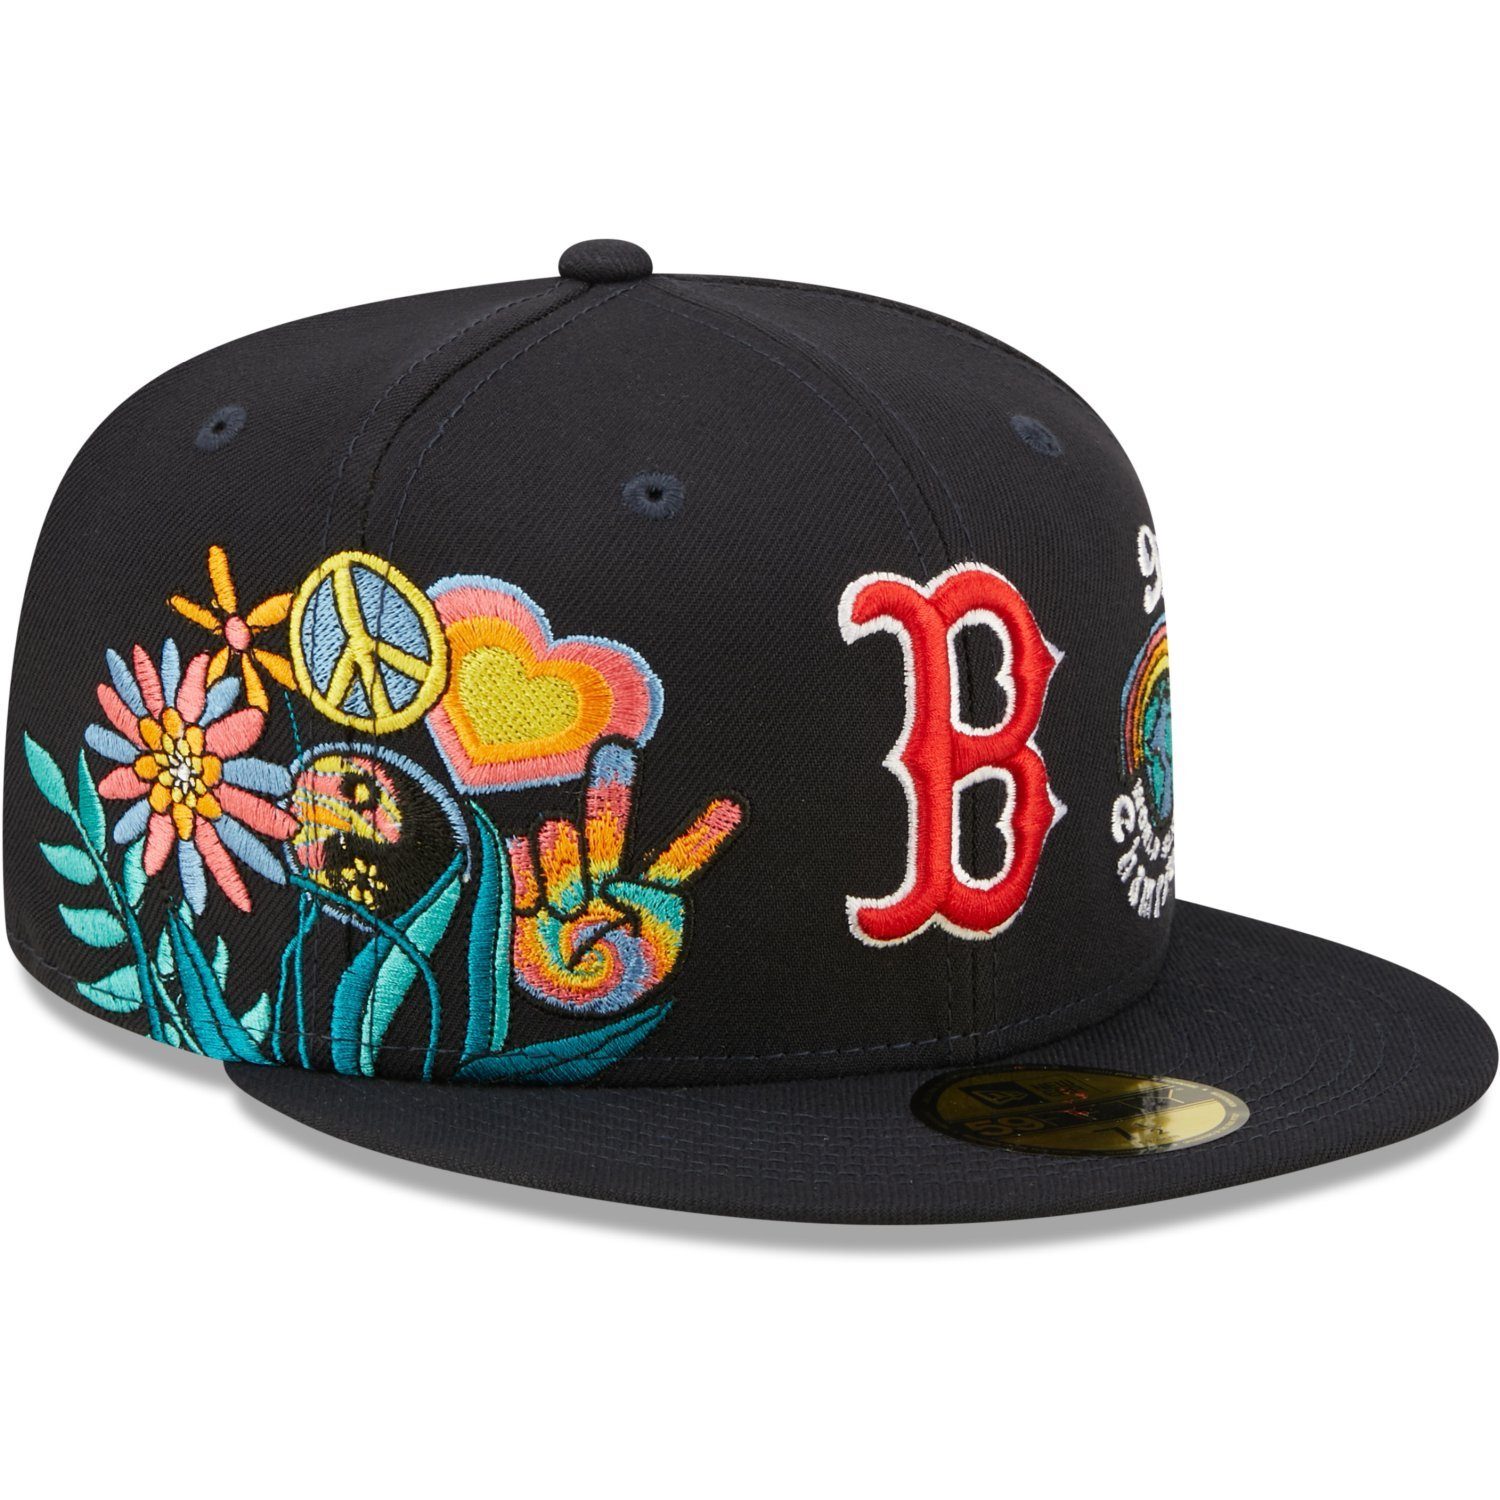 New Era Fitted Cap 59Fifty GROOVY Boston Red Sox | Fitted Caps